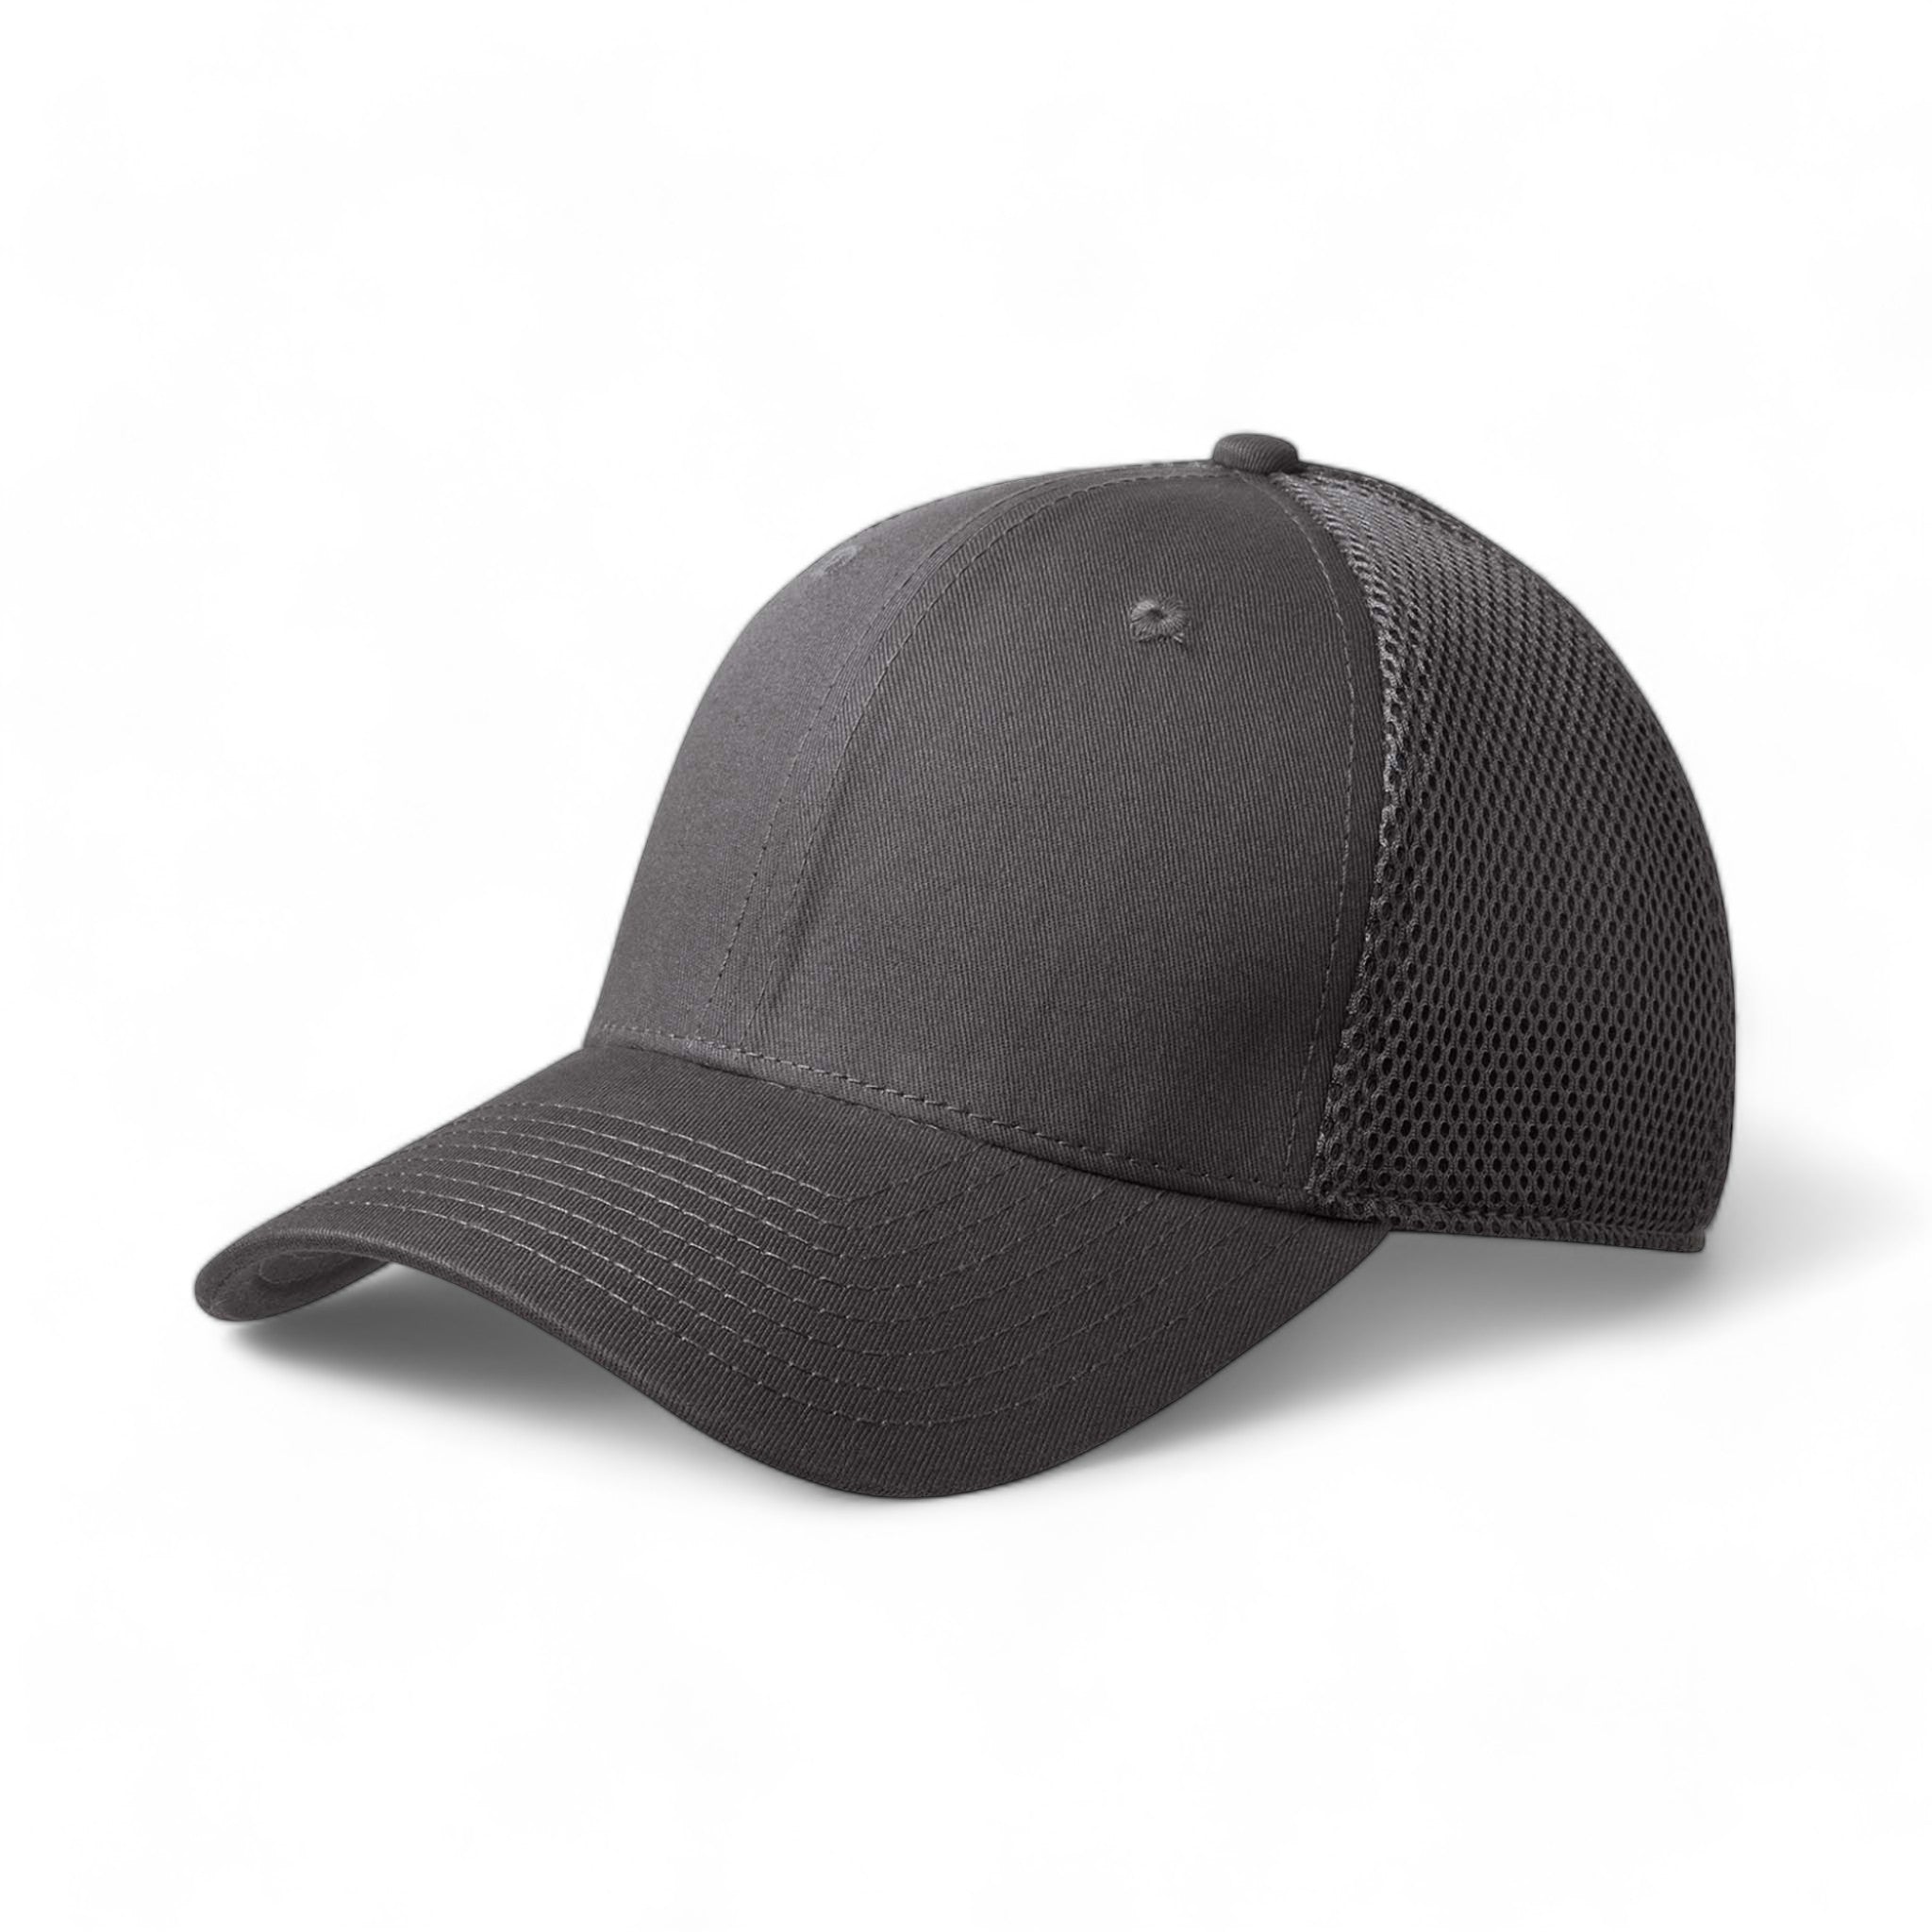 Side view of New Era NE1020 custom hat in charcoal and charcoal